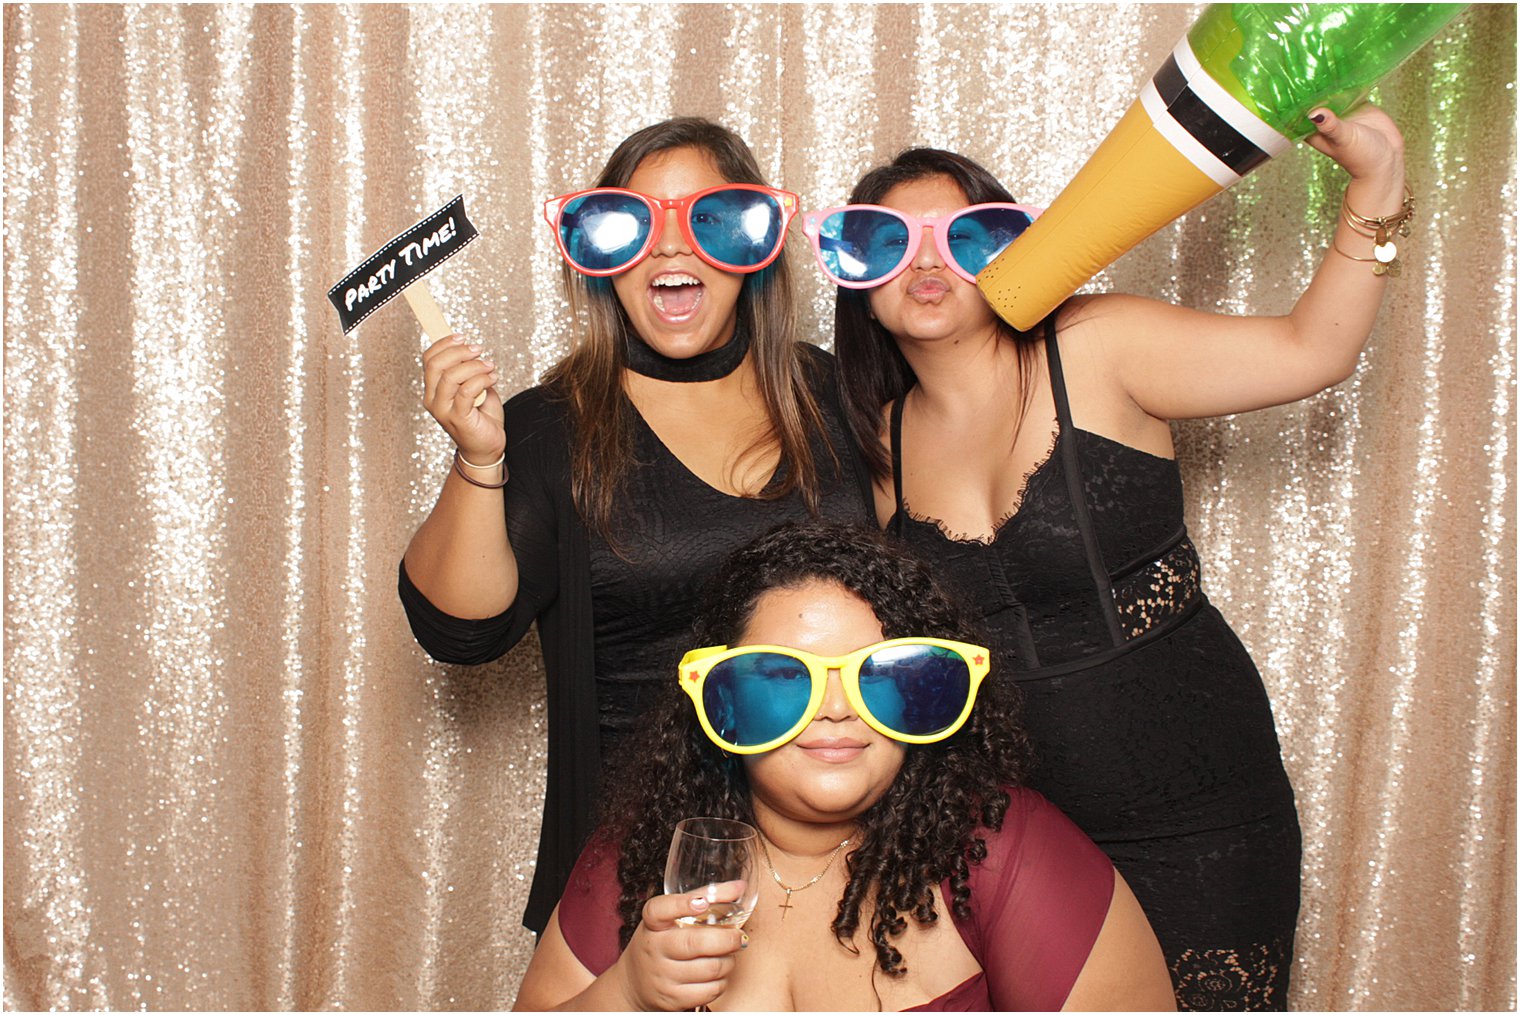 wedding guests play in photo booth during NJ wedding reception